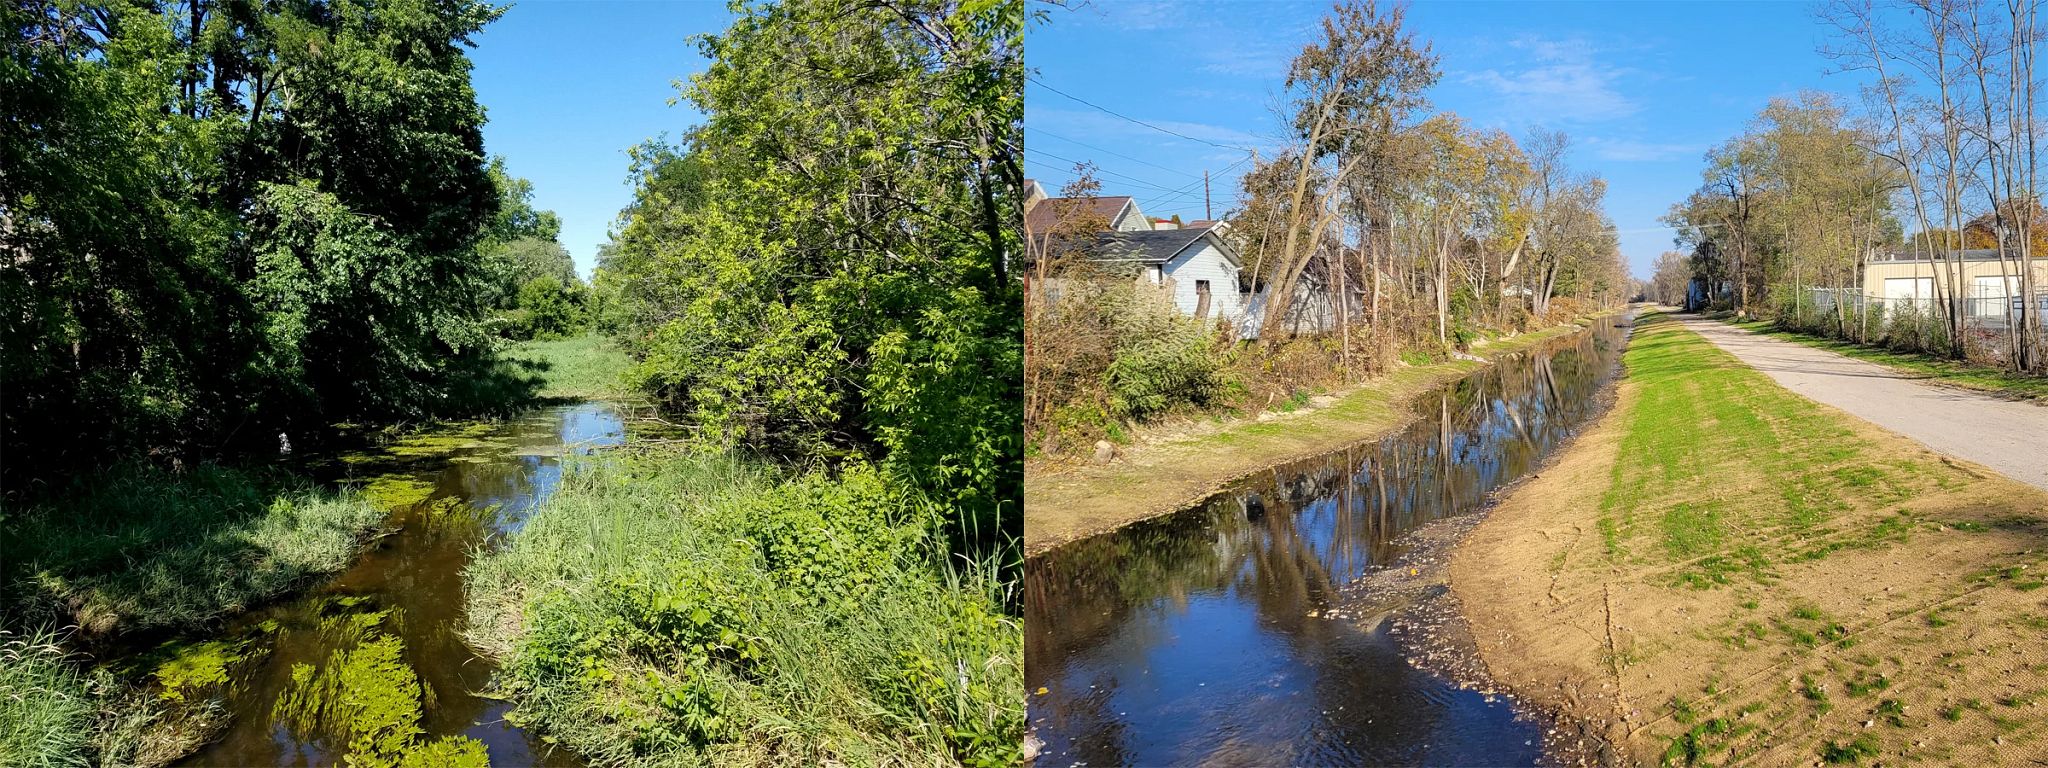 A before and after view of the Portage Canal